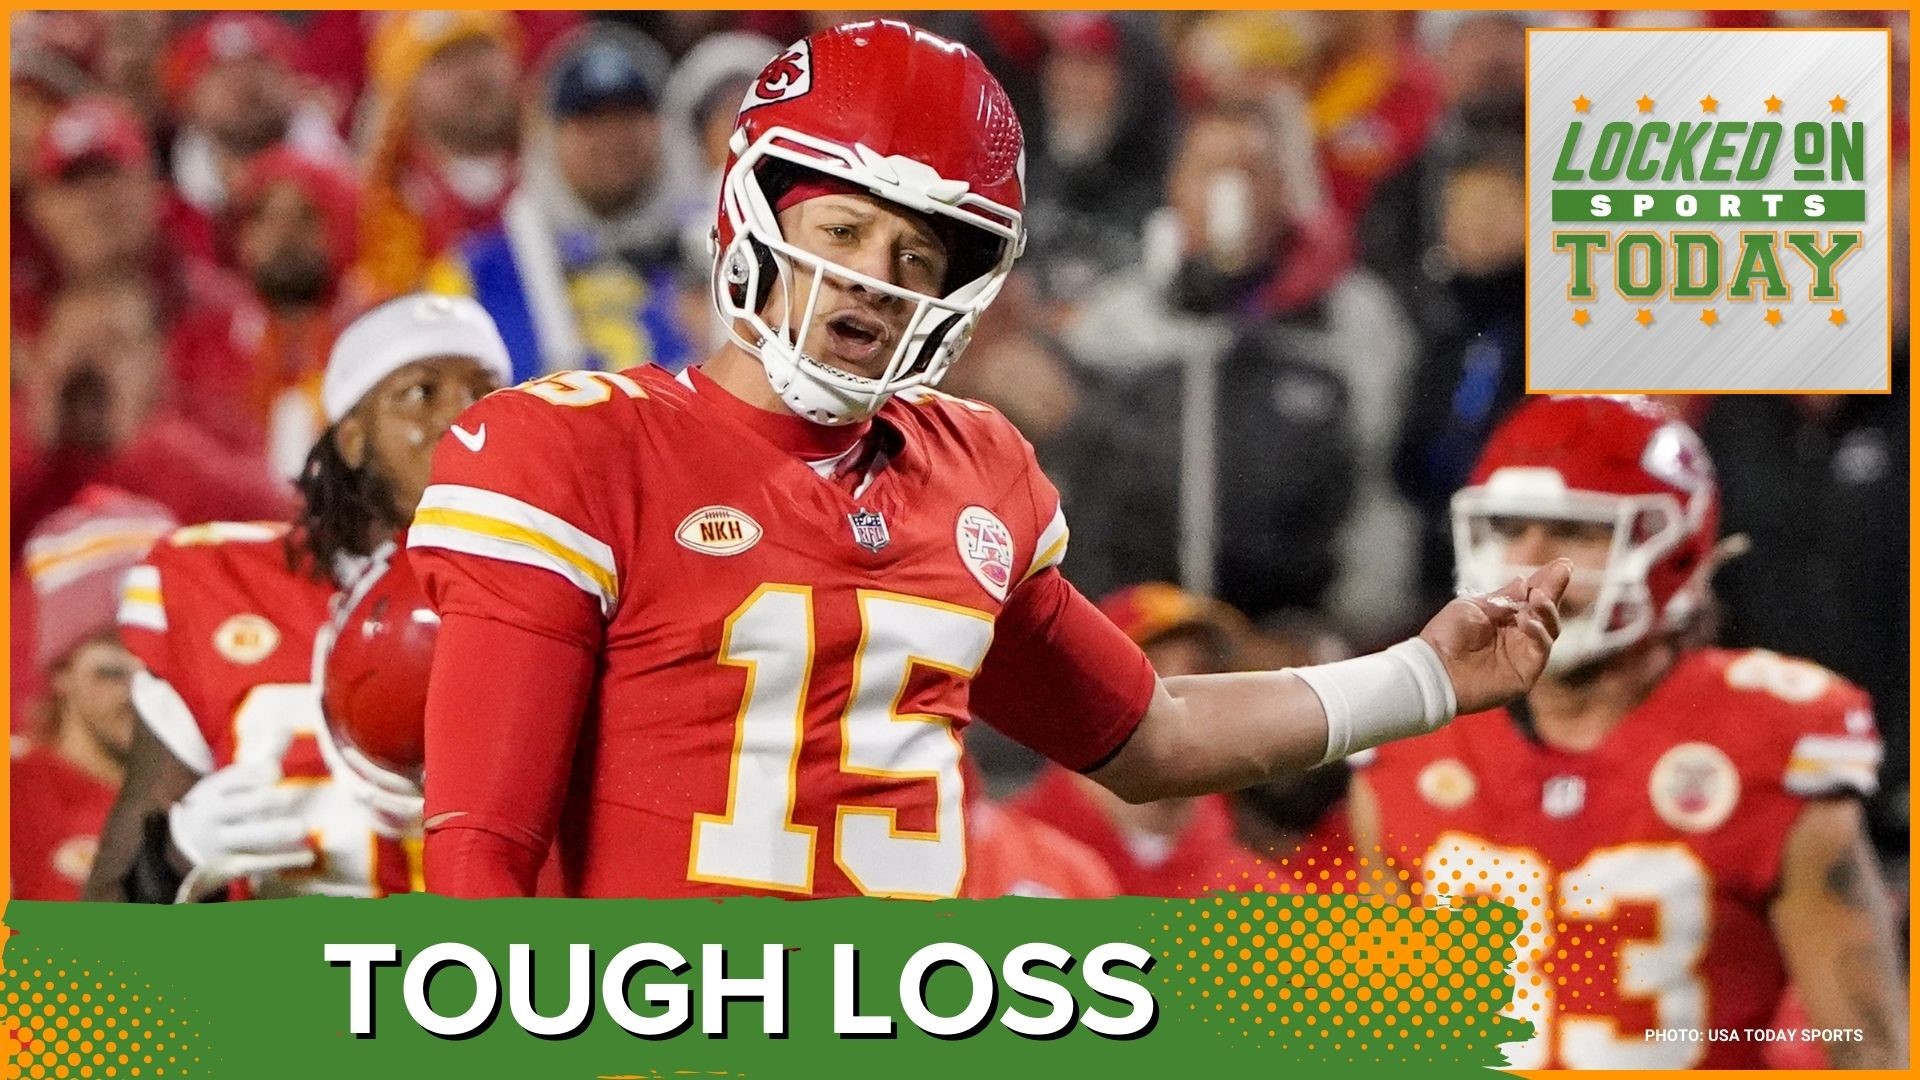 Discussing the day's top sports stories from the Kansas City Chiefs lose two games in a row to the Cowboys get a statement win over the Eagles and Ohtani's new home.